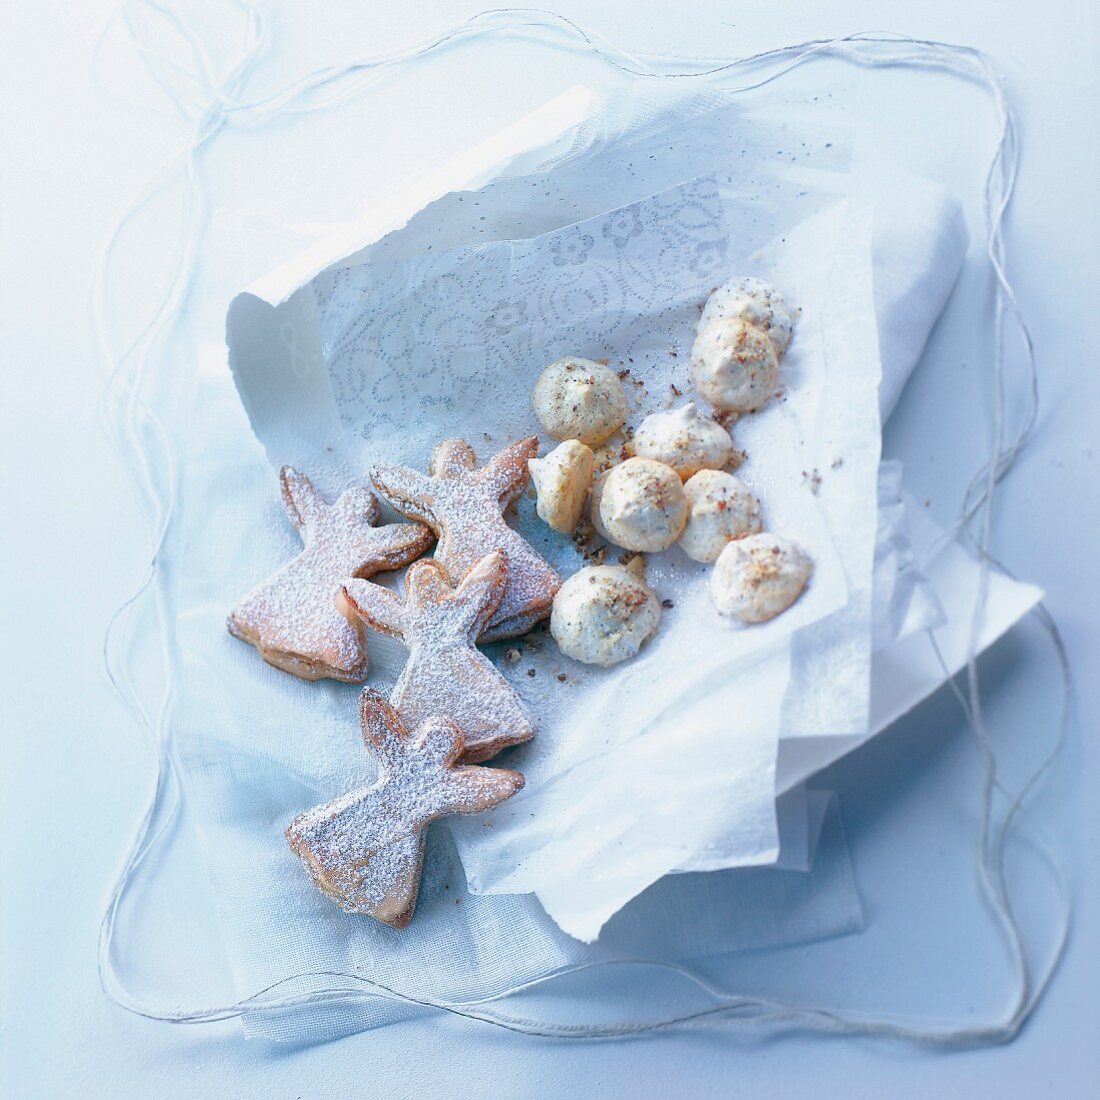 Small hazelnut meringues and angel-shaped cookies